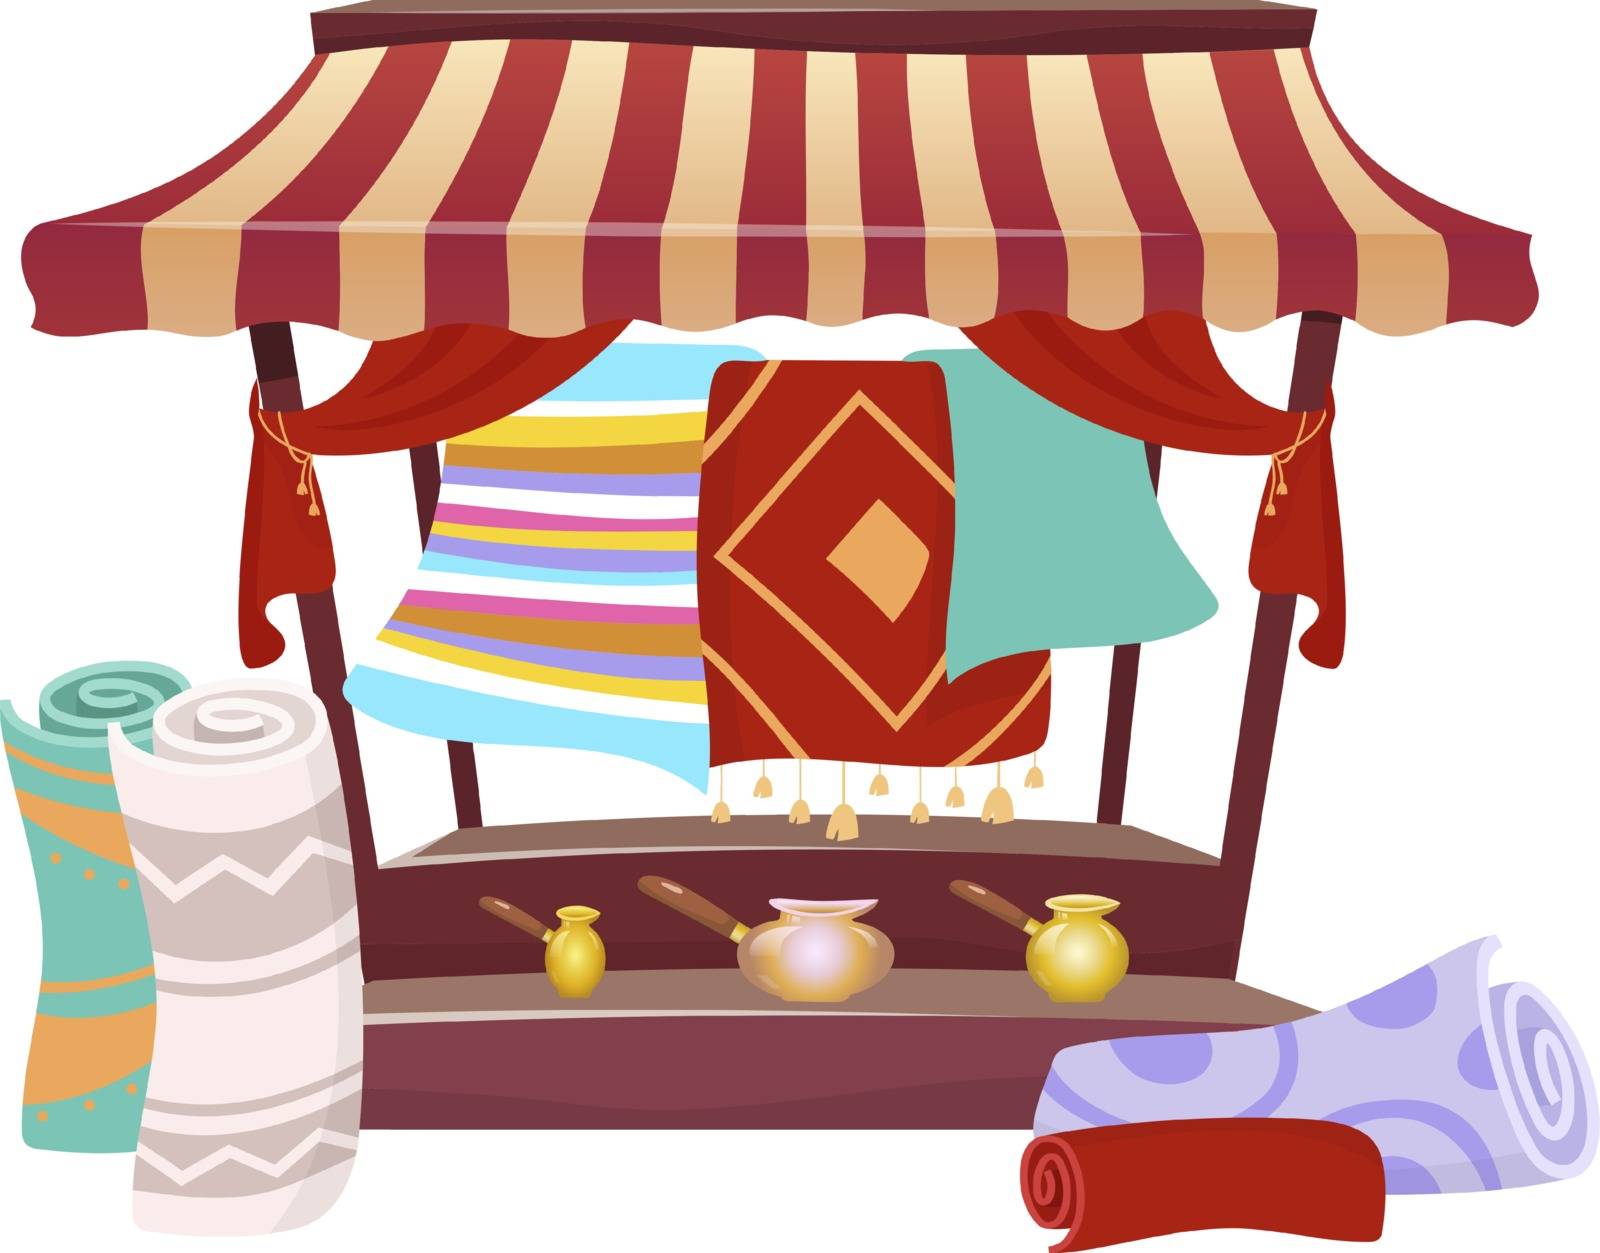 Bazaar trade awning with handmade carpets cartoon vector illustration. Eastern marketplace tent, canopy with souvenirs, persian rugs flat color object. Asian fair marquee isolated on white background